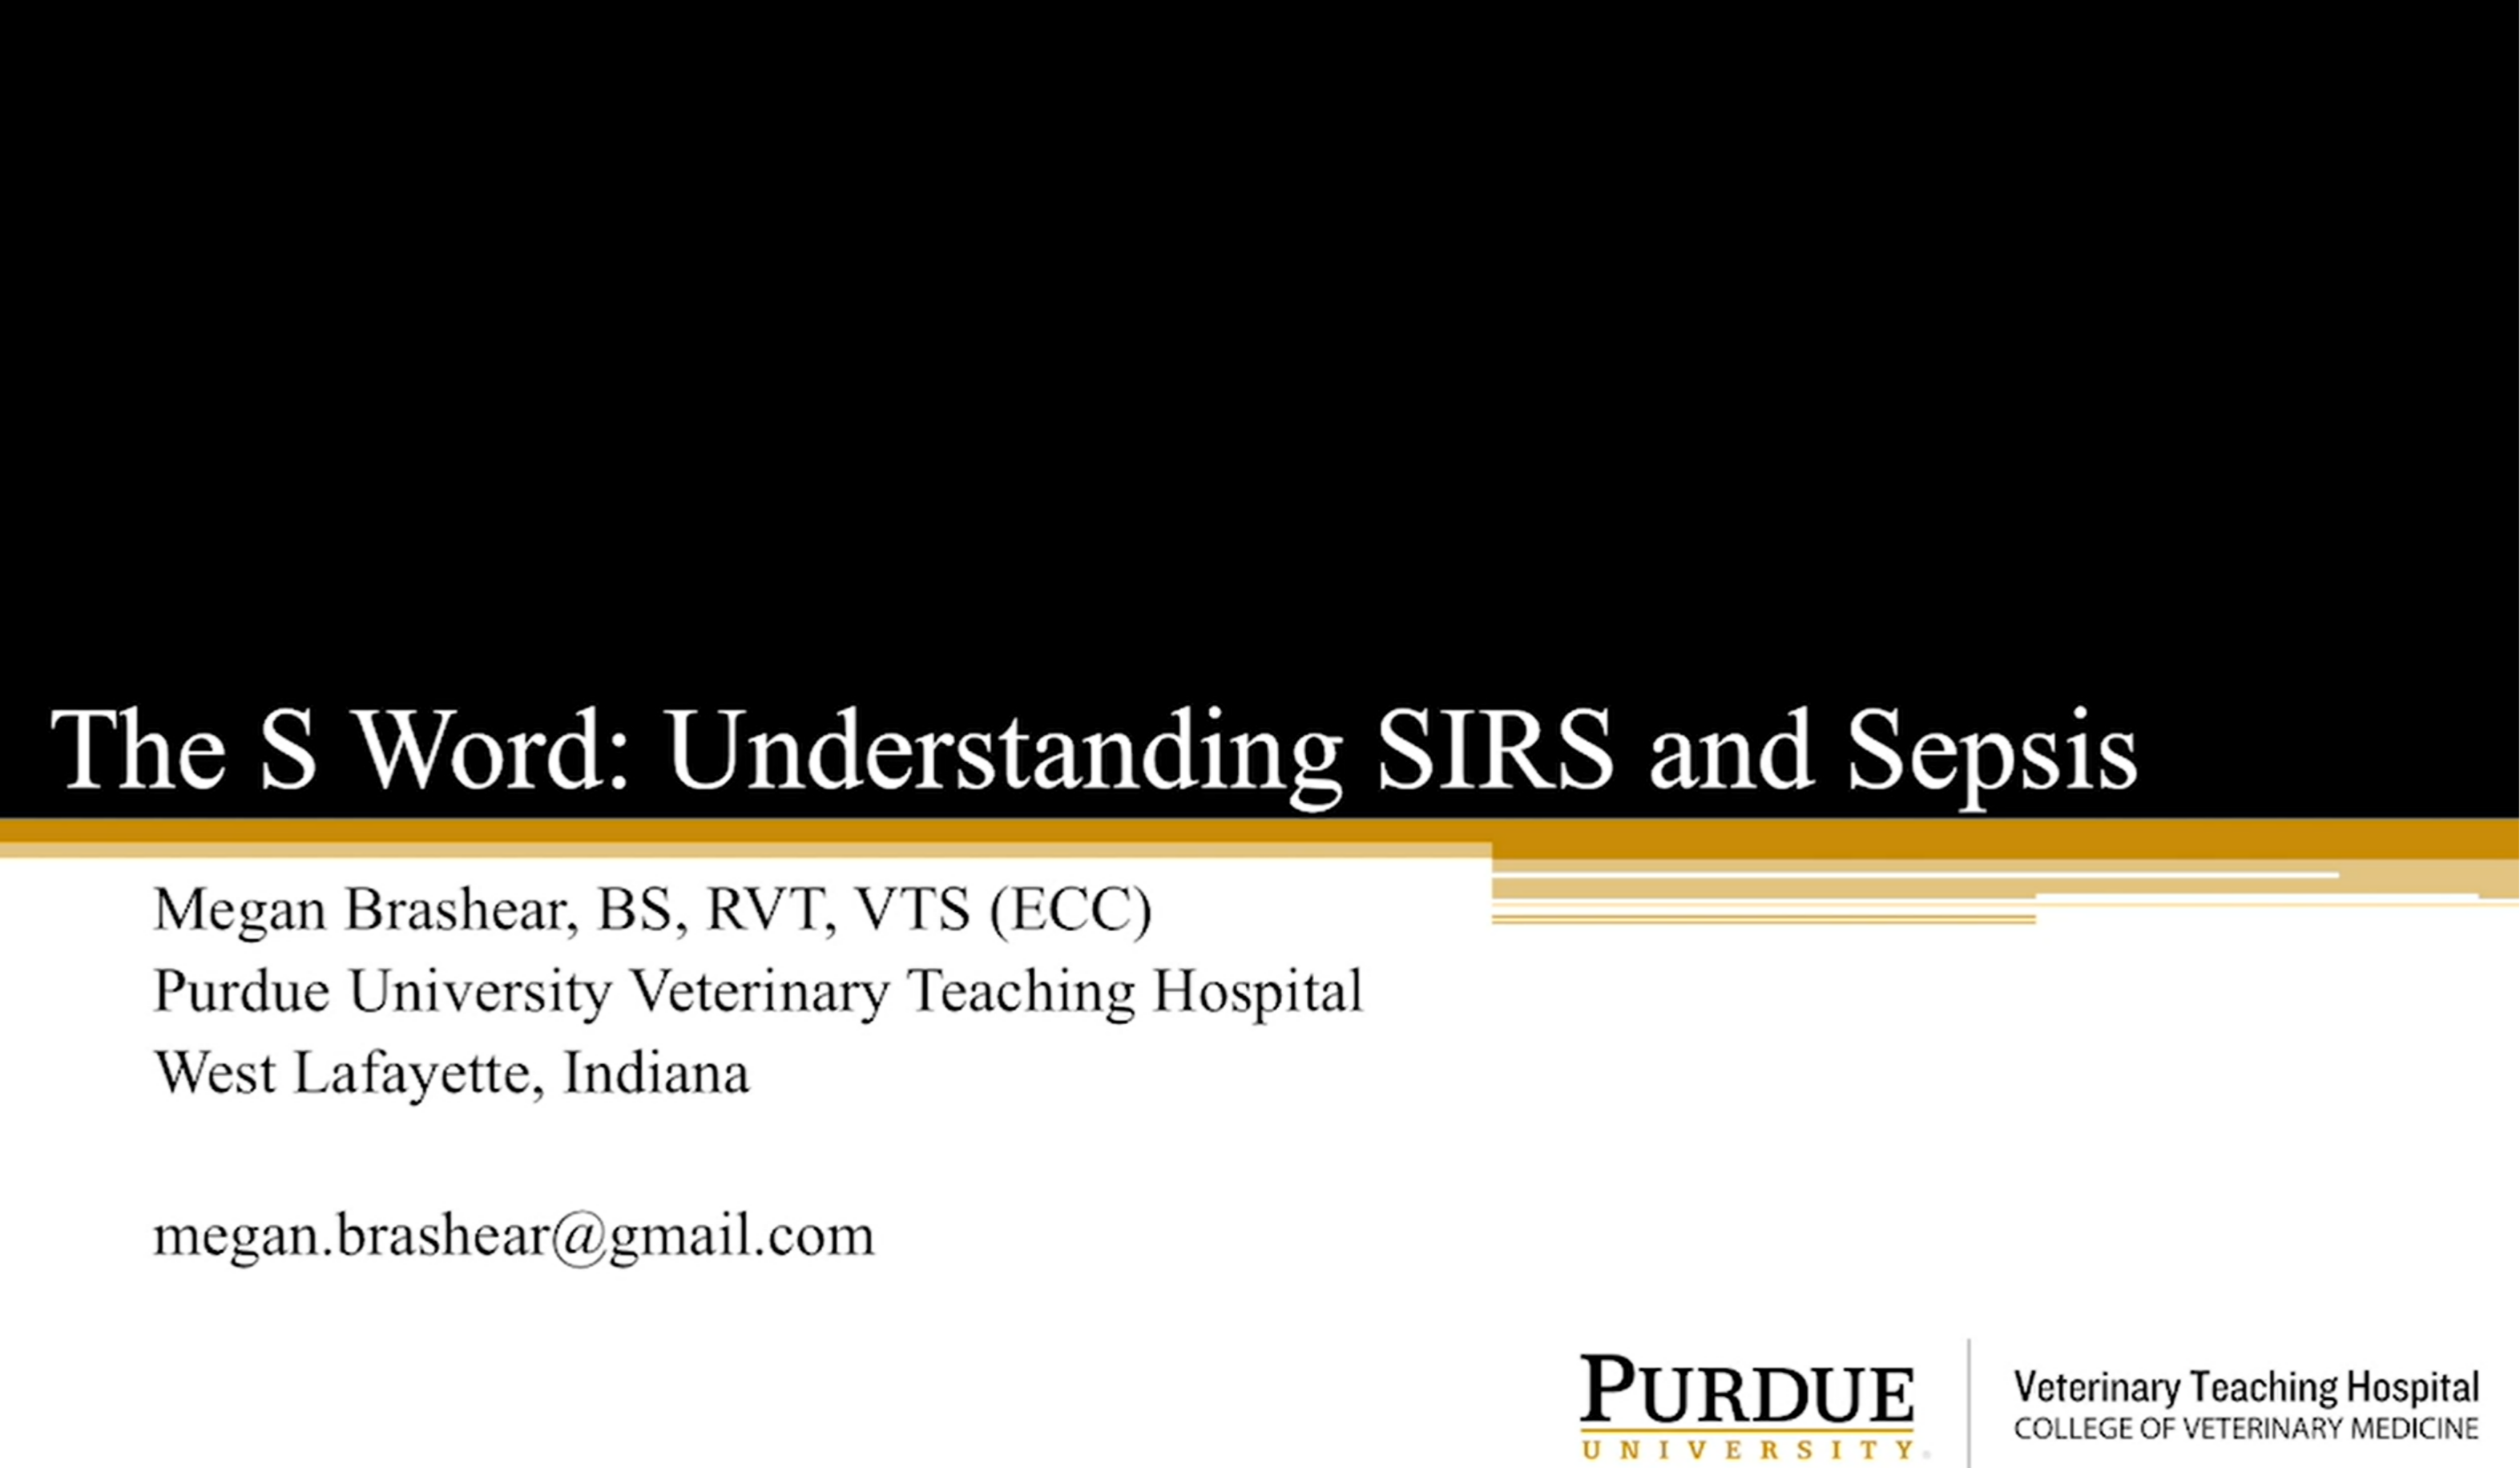 The S Word: Understanding SIRS and Sepsis icon